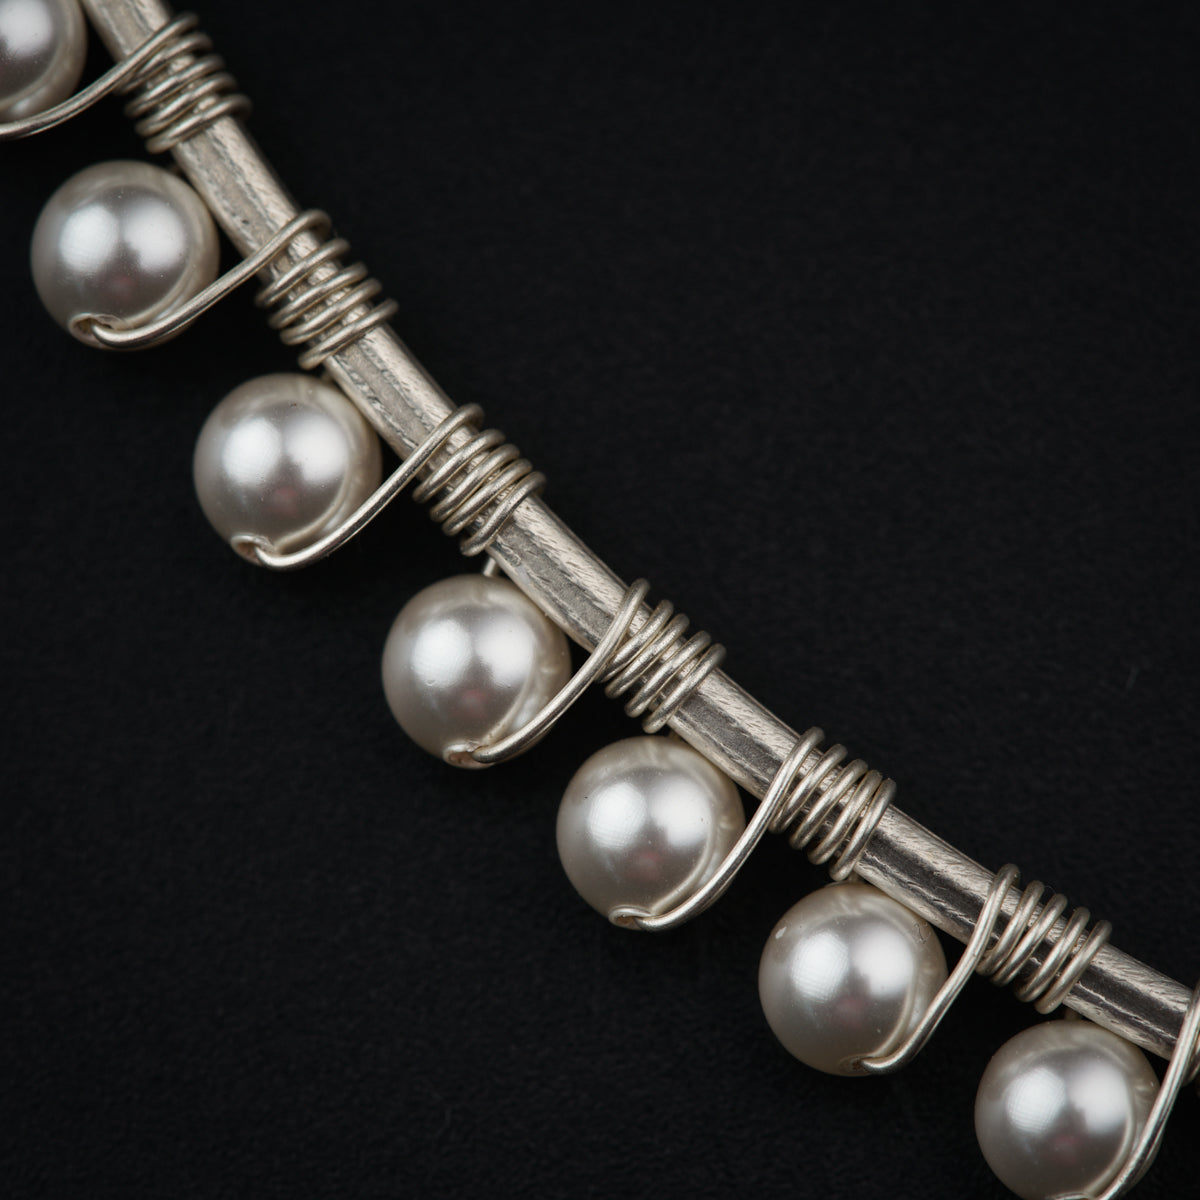 a close up of a necklace with pearls on it